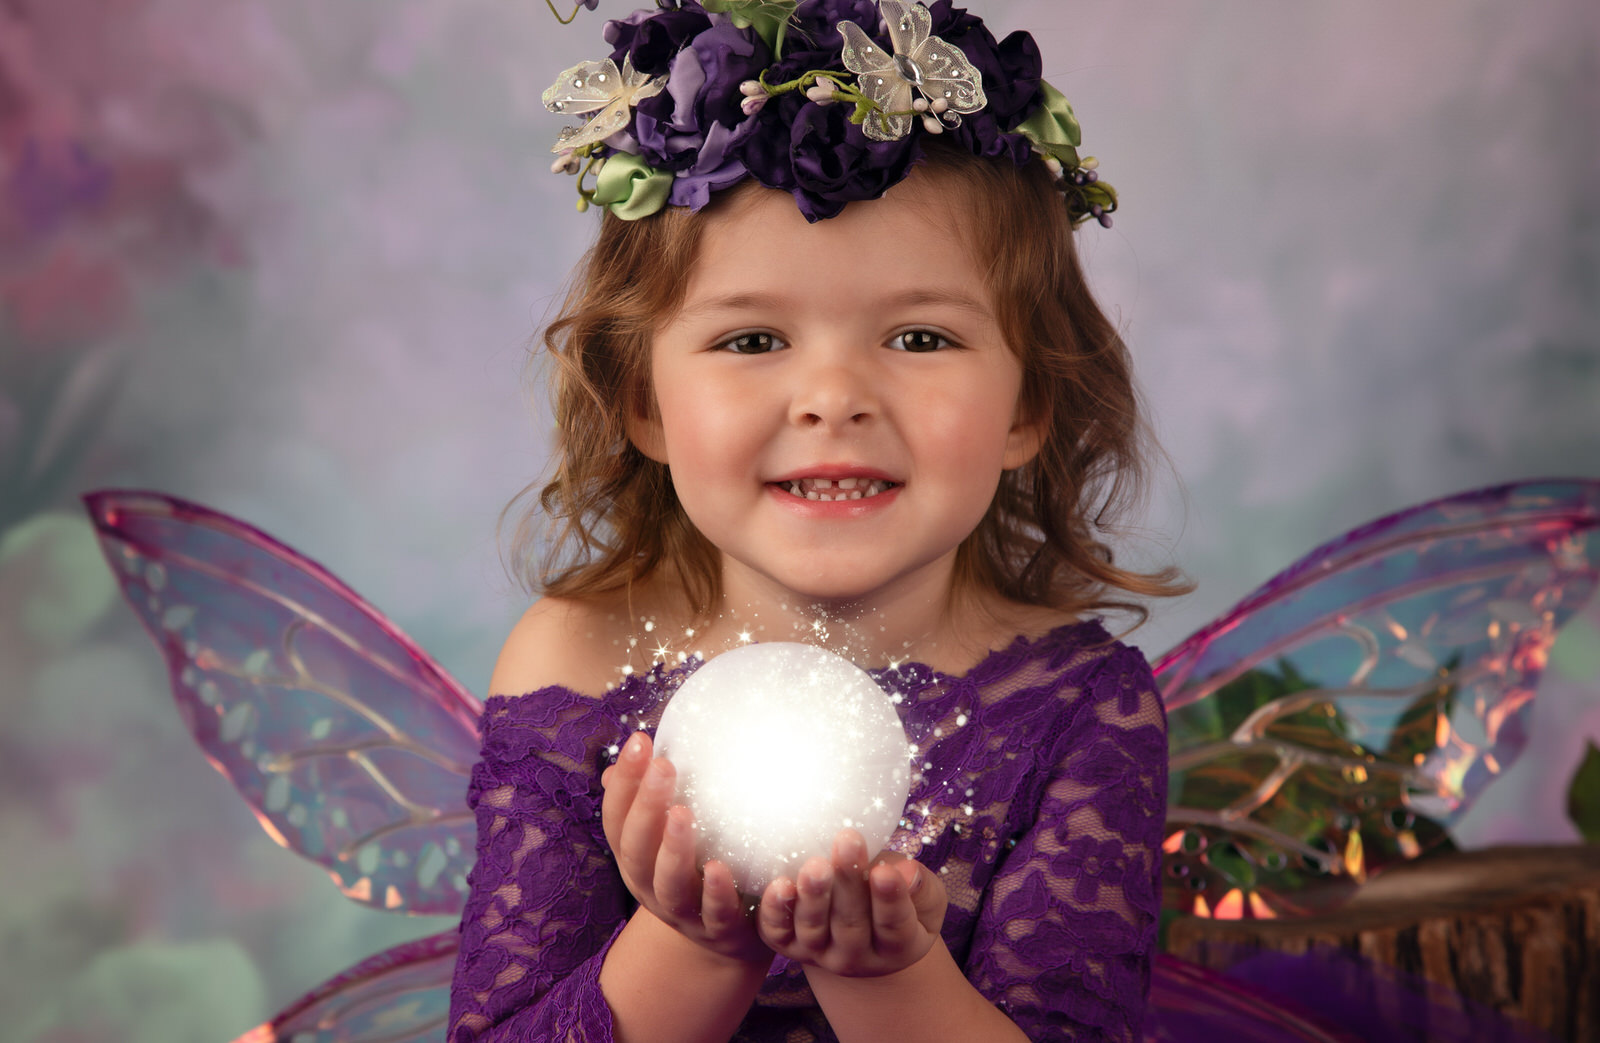 A young girl dressed as a purple fairy holds a magical orb in a studio